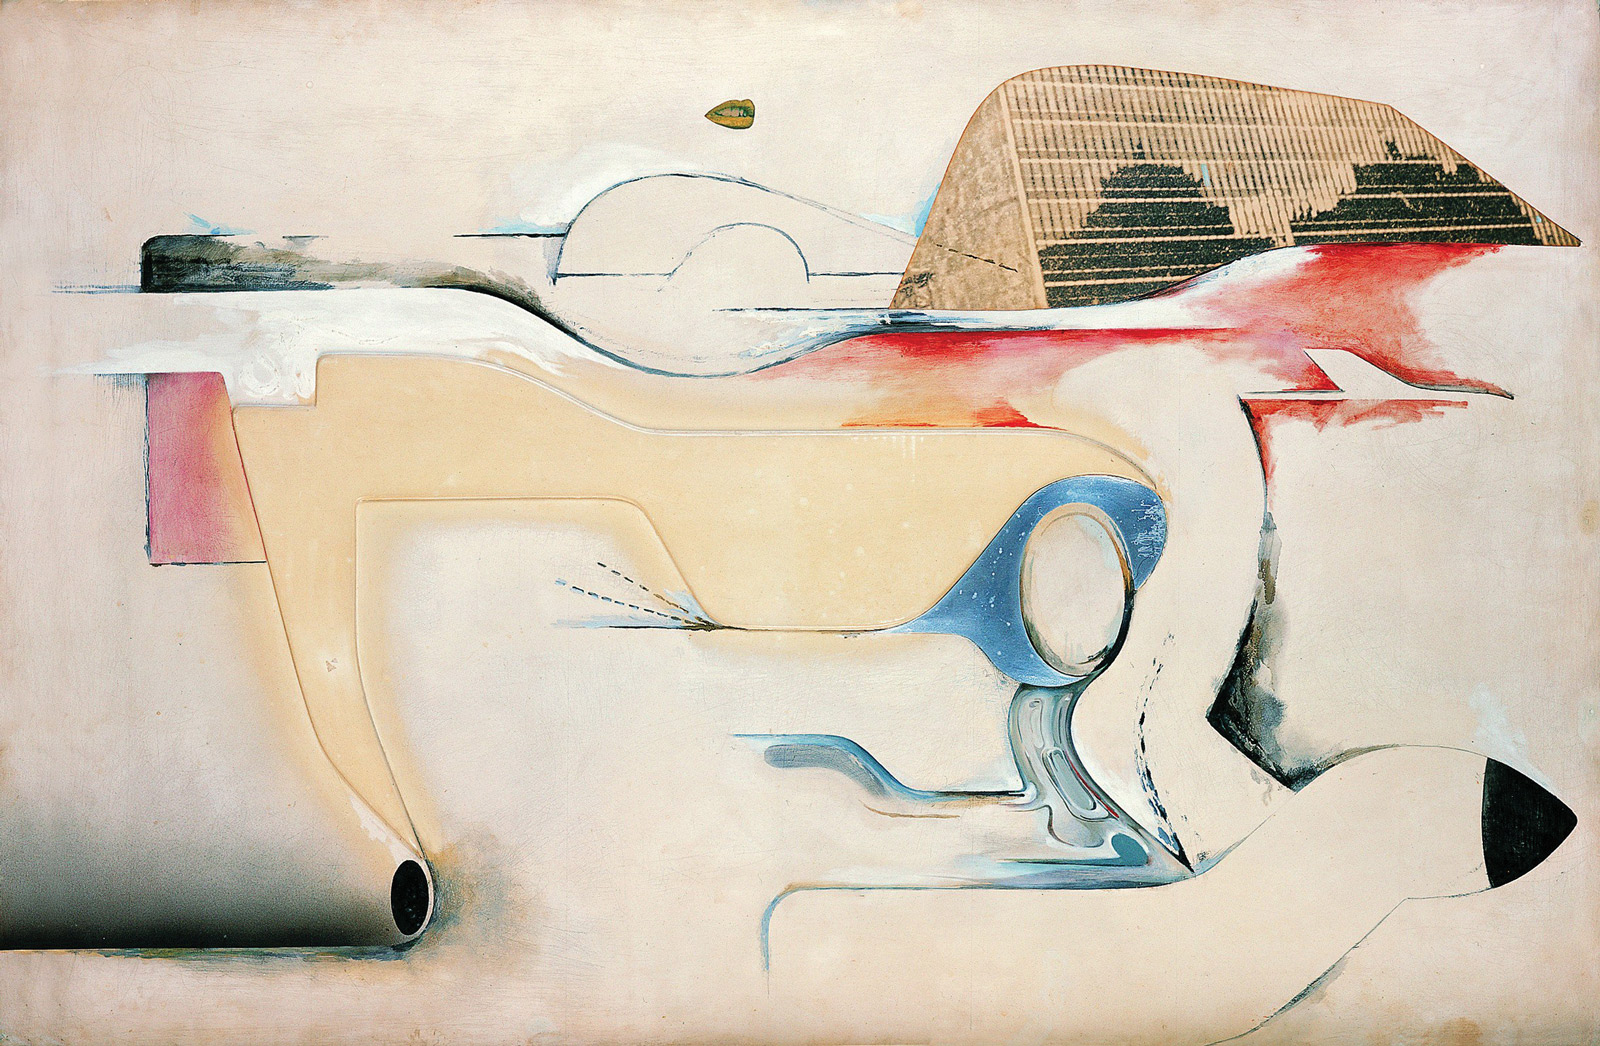 Blended anatomies. Richard Hamilton, Hers Is a Lush Situation, 1958.